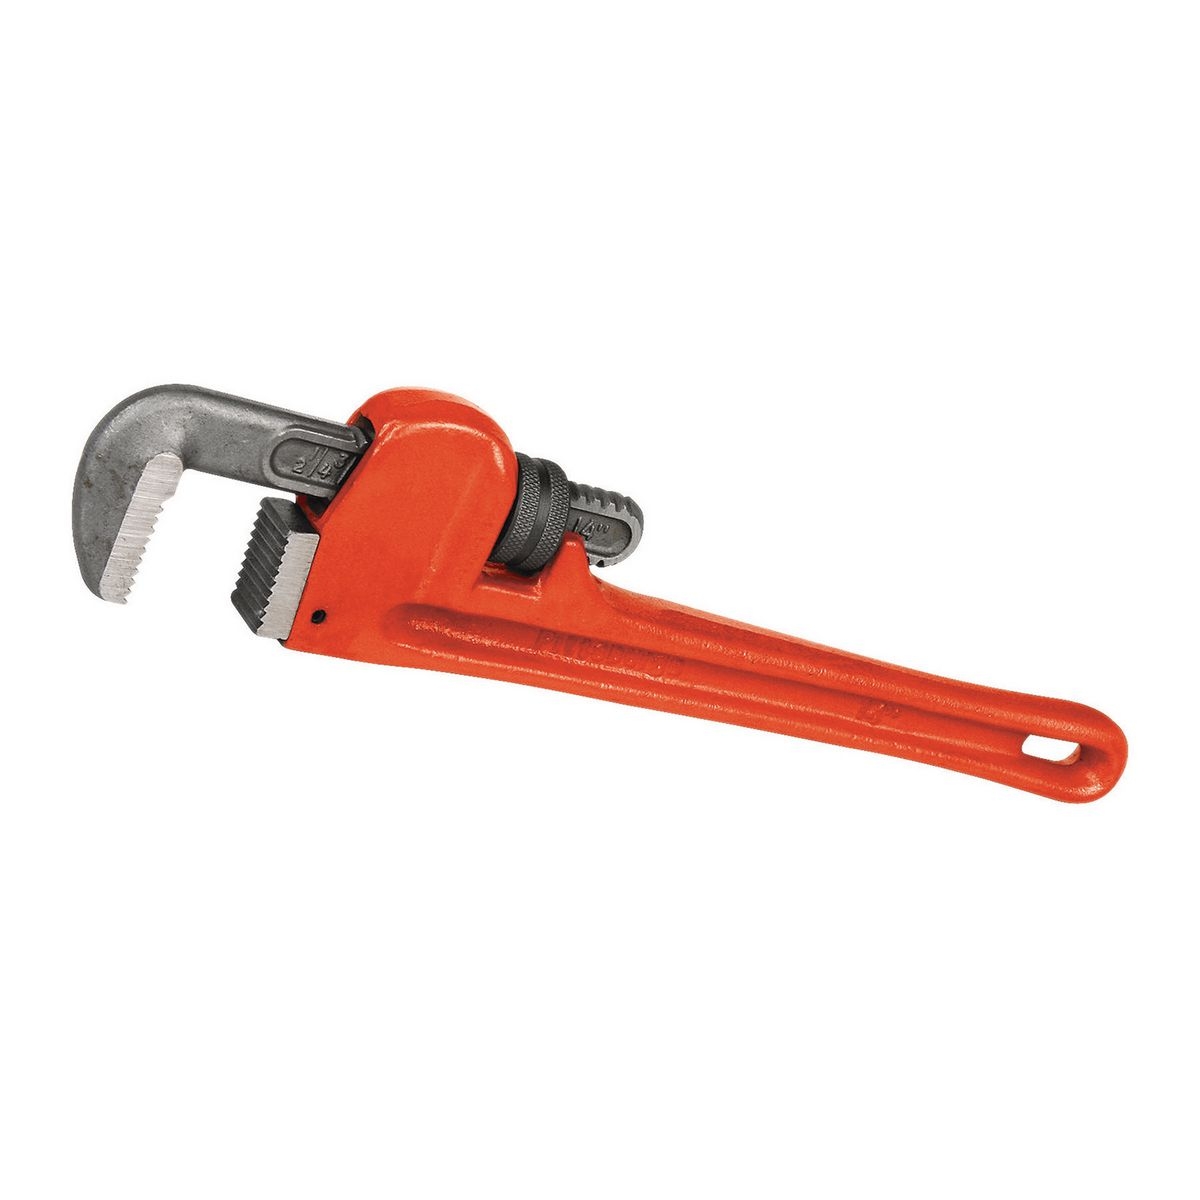 PITTSBURGH 14 in. Steel Pipe Wrench - Item 61349 / 39643